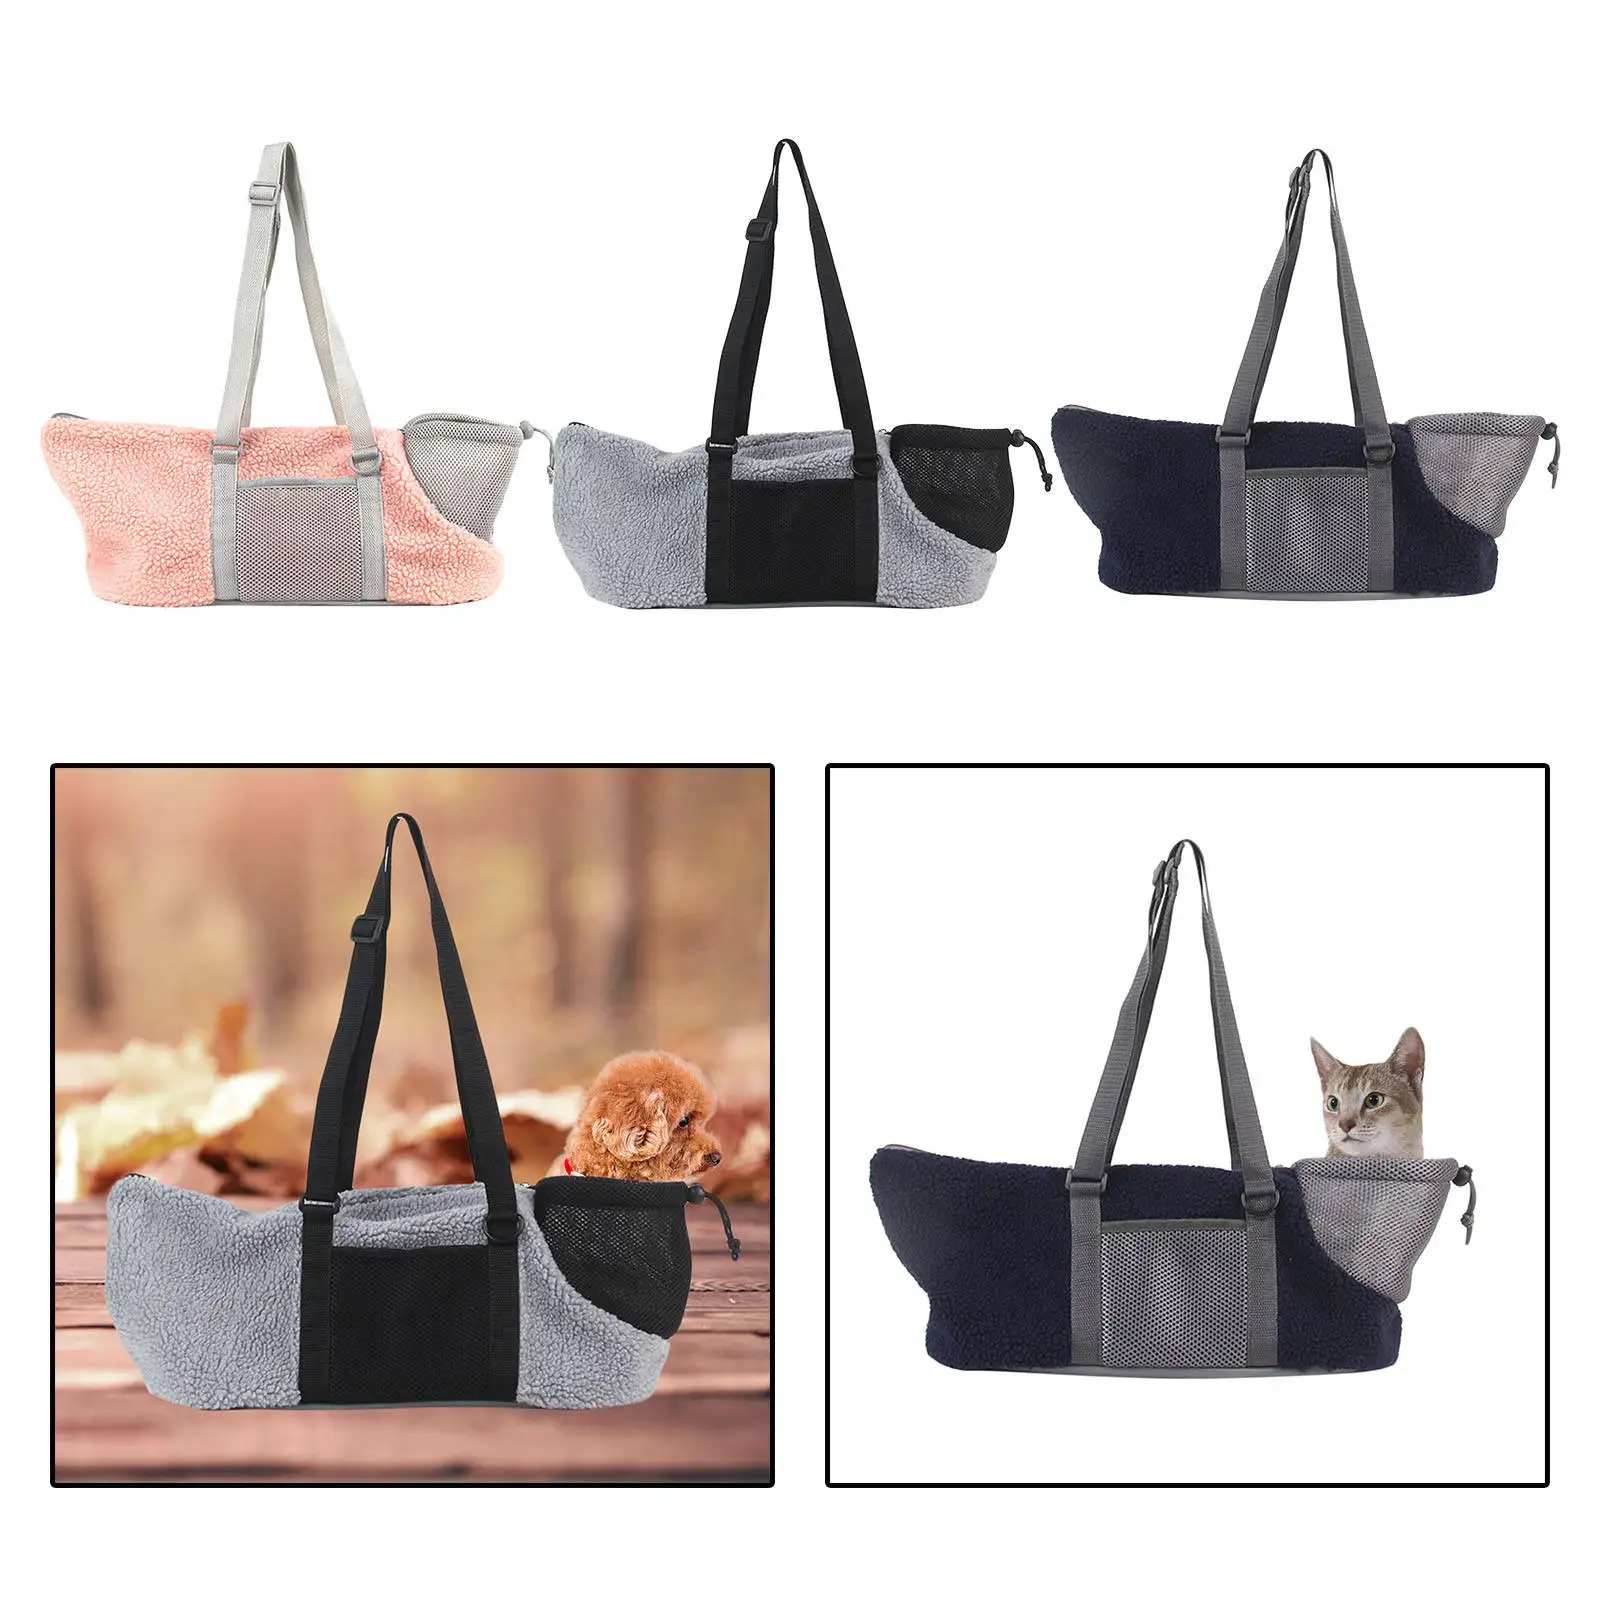 Outdoor Pet Carrier Backpack Comfort Adjustable Strap Mesh Warm Tote Handbag Pet Bag for Shopping Cats Travel Winter Small Dogs